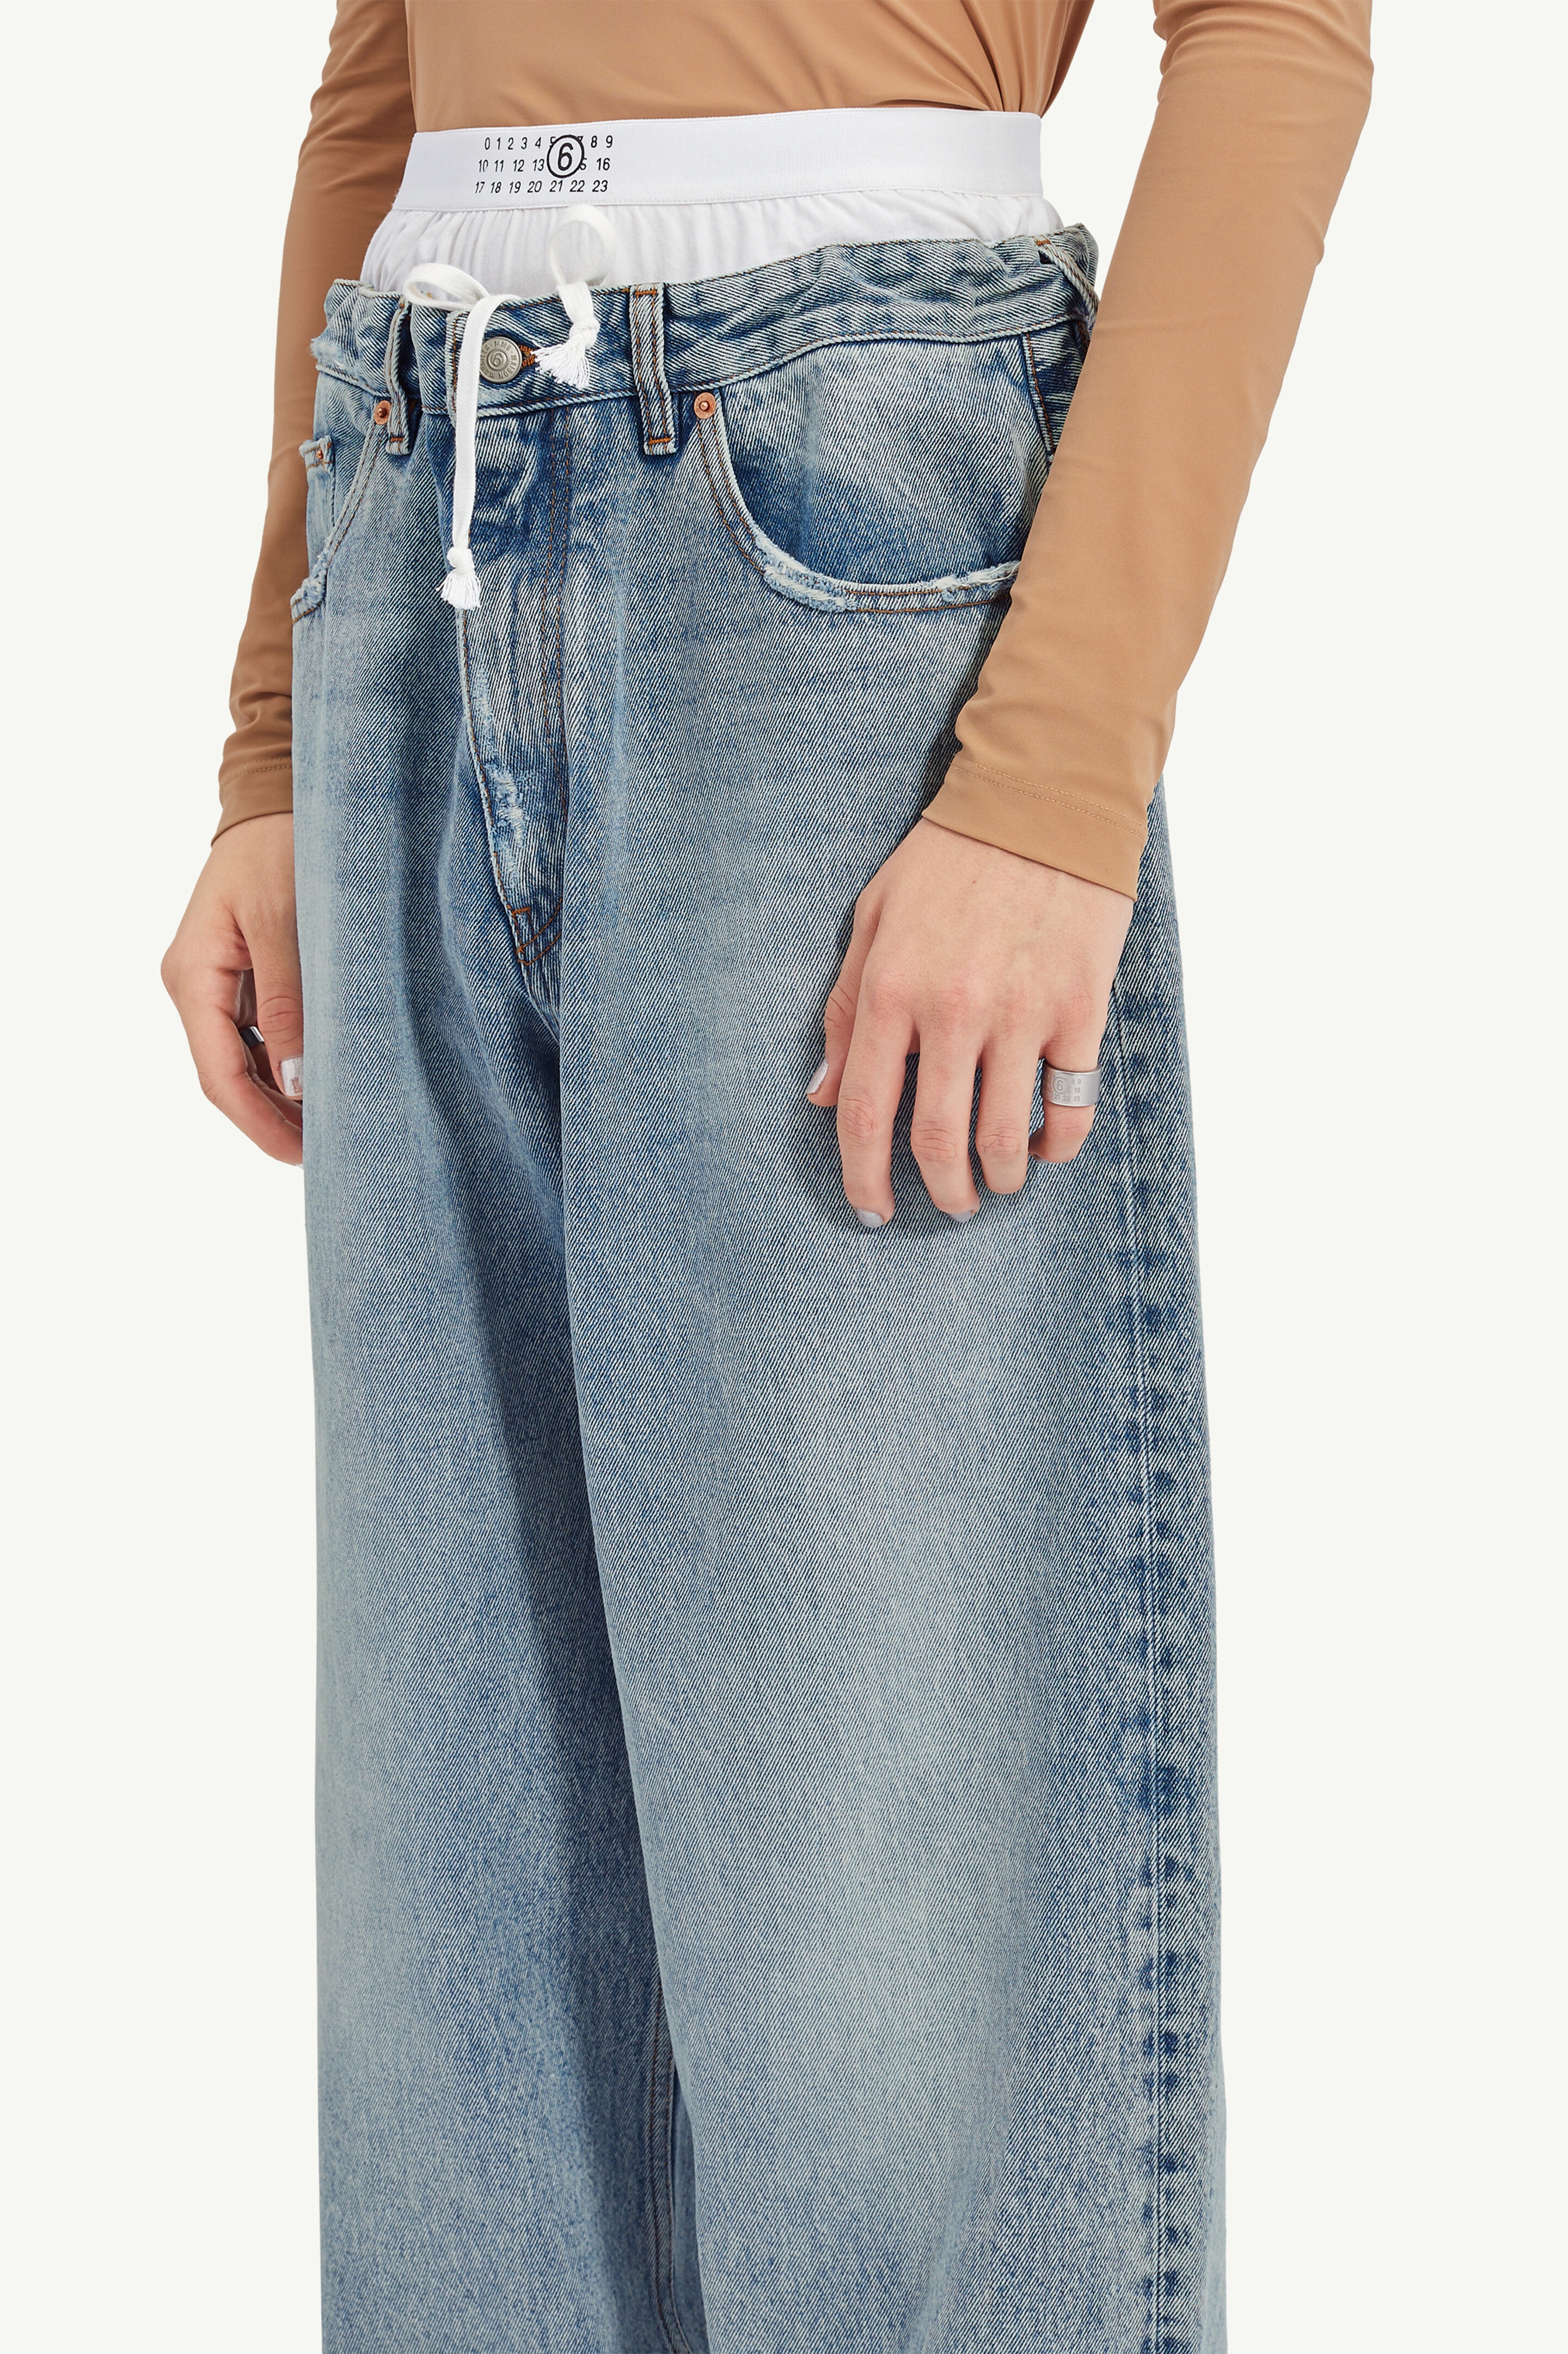 Layered jeans - 5